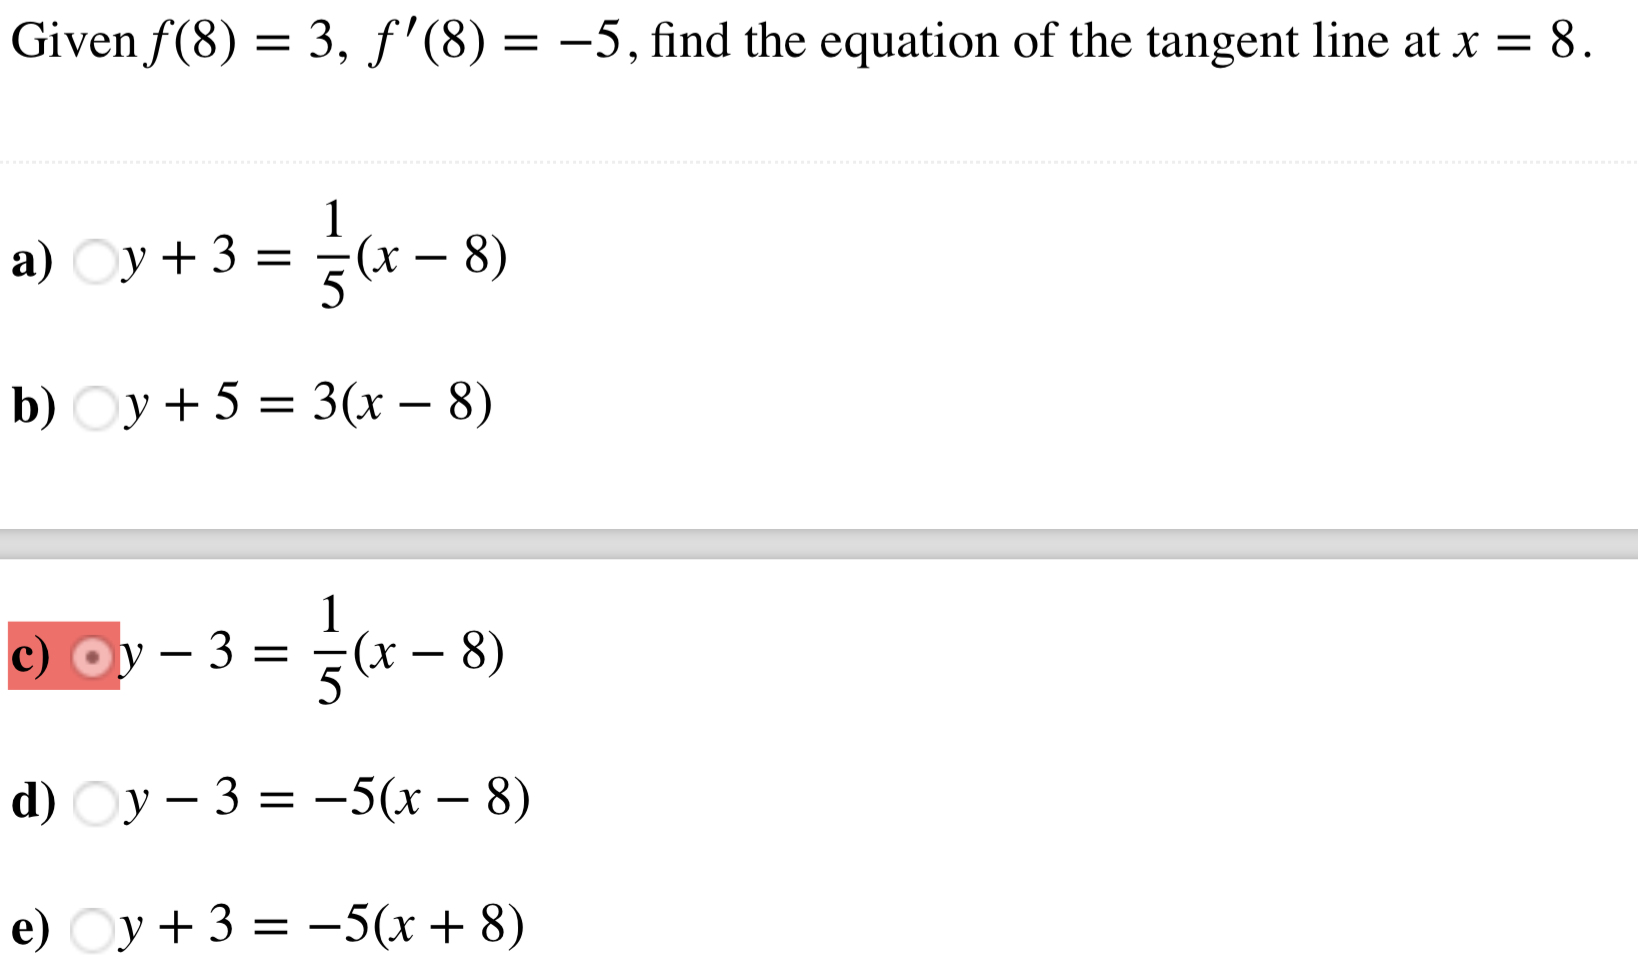 Given f (8)-3, f'(8)--5, find the equation of the tangent line at x - 8
a)
y+3
(x-8)
b) Oy +5 -3(r - 8)
c)
3-(x - 8)
